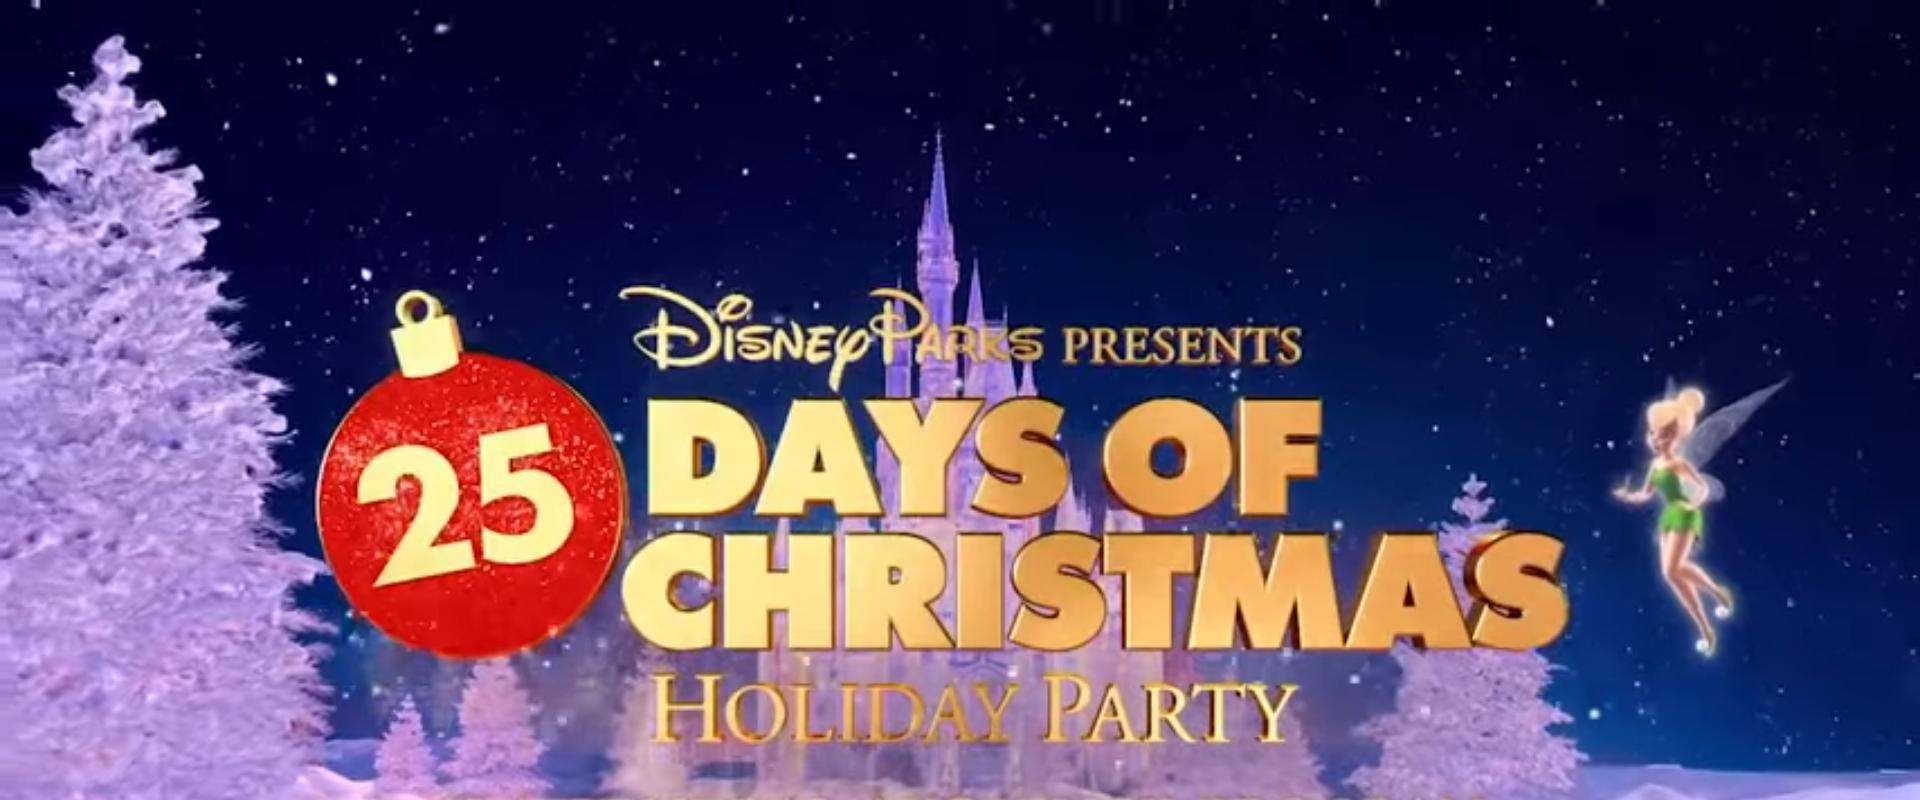 Disney Parks Presents a 25 Days of Christmas Holiday Party background 1